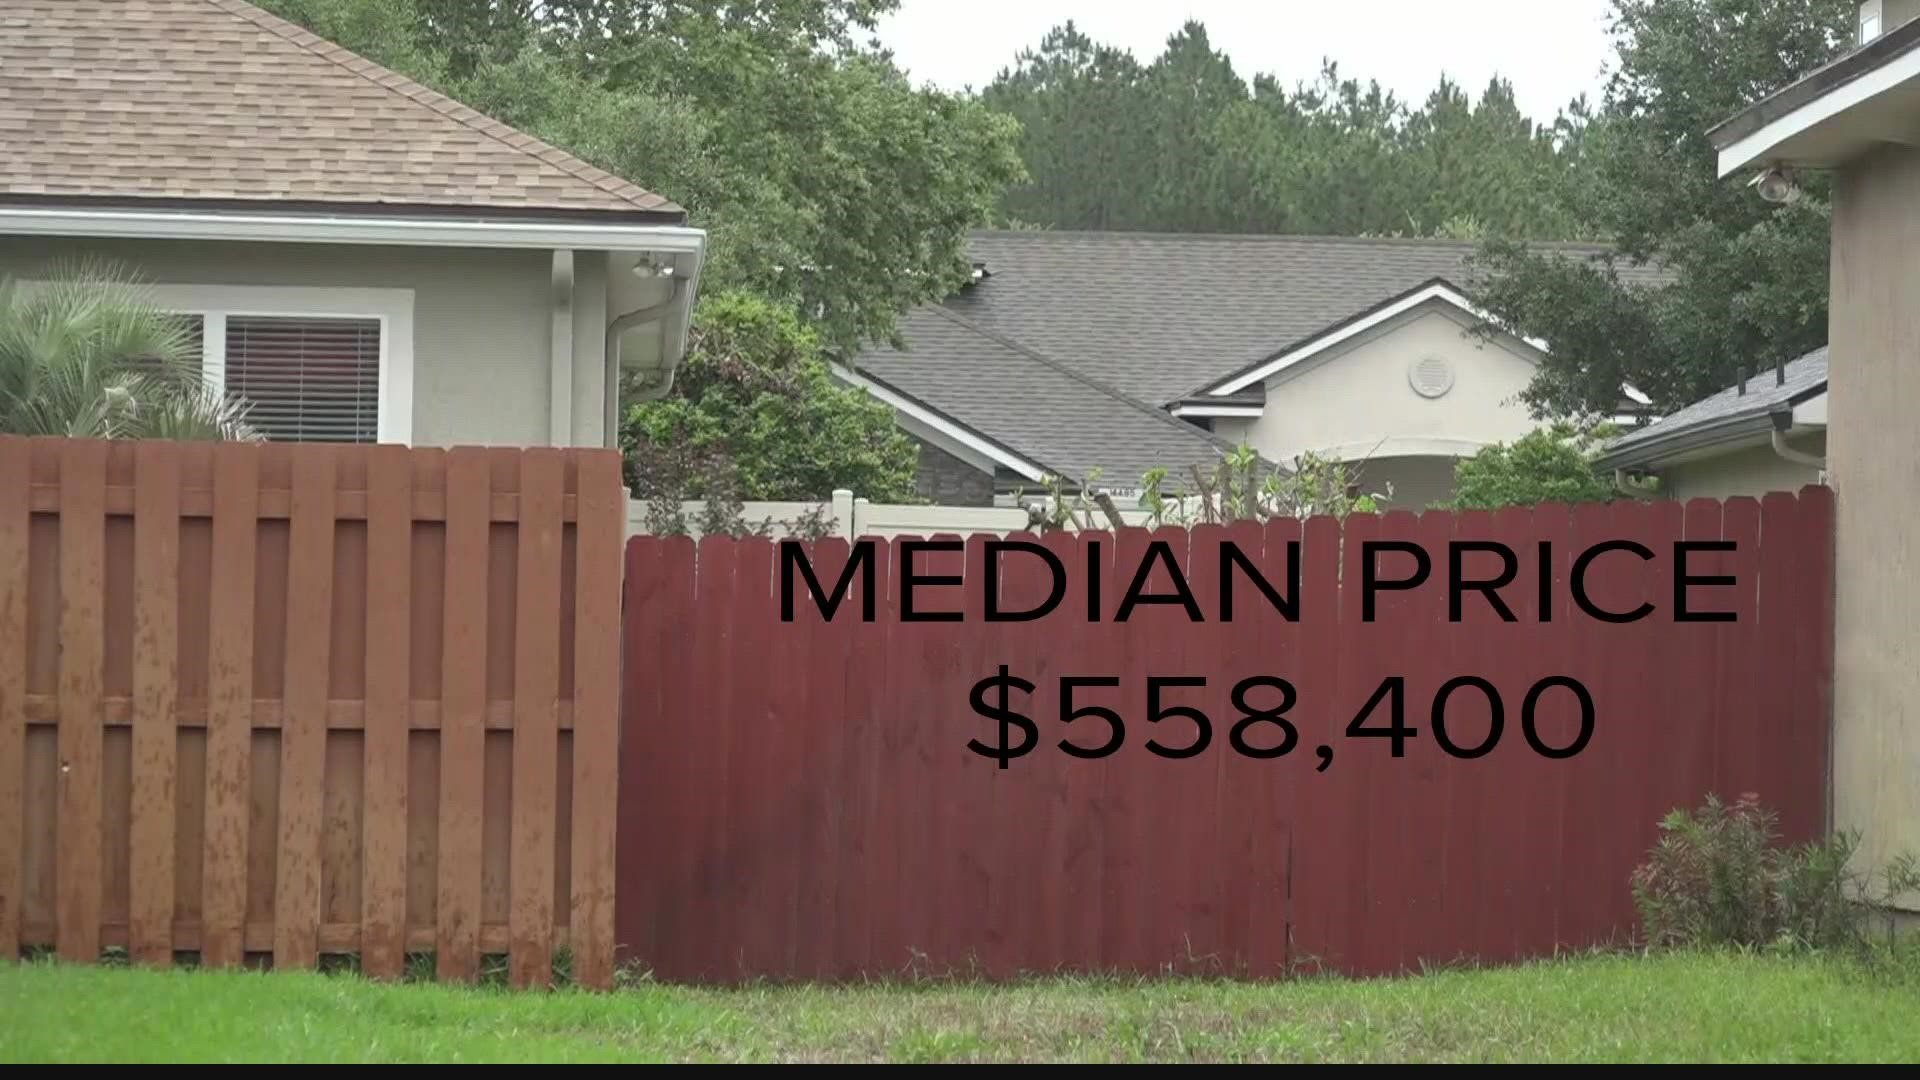 Prices of homes are skyrocketing across the First Coast.